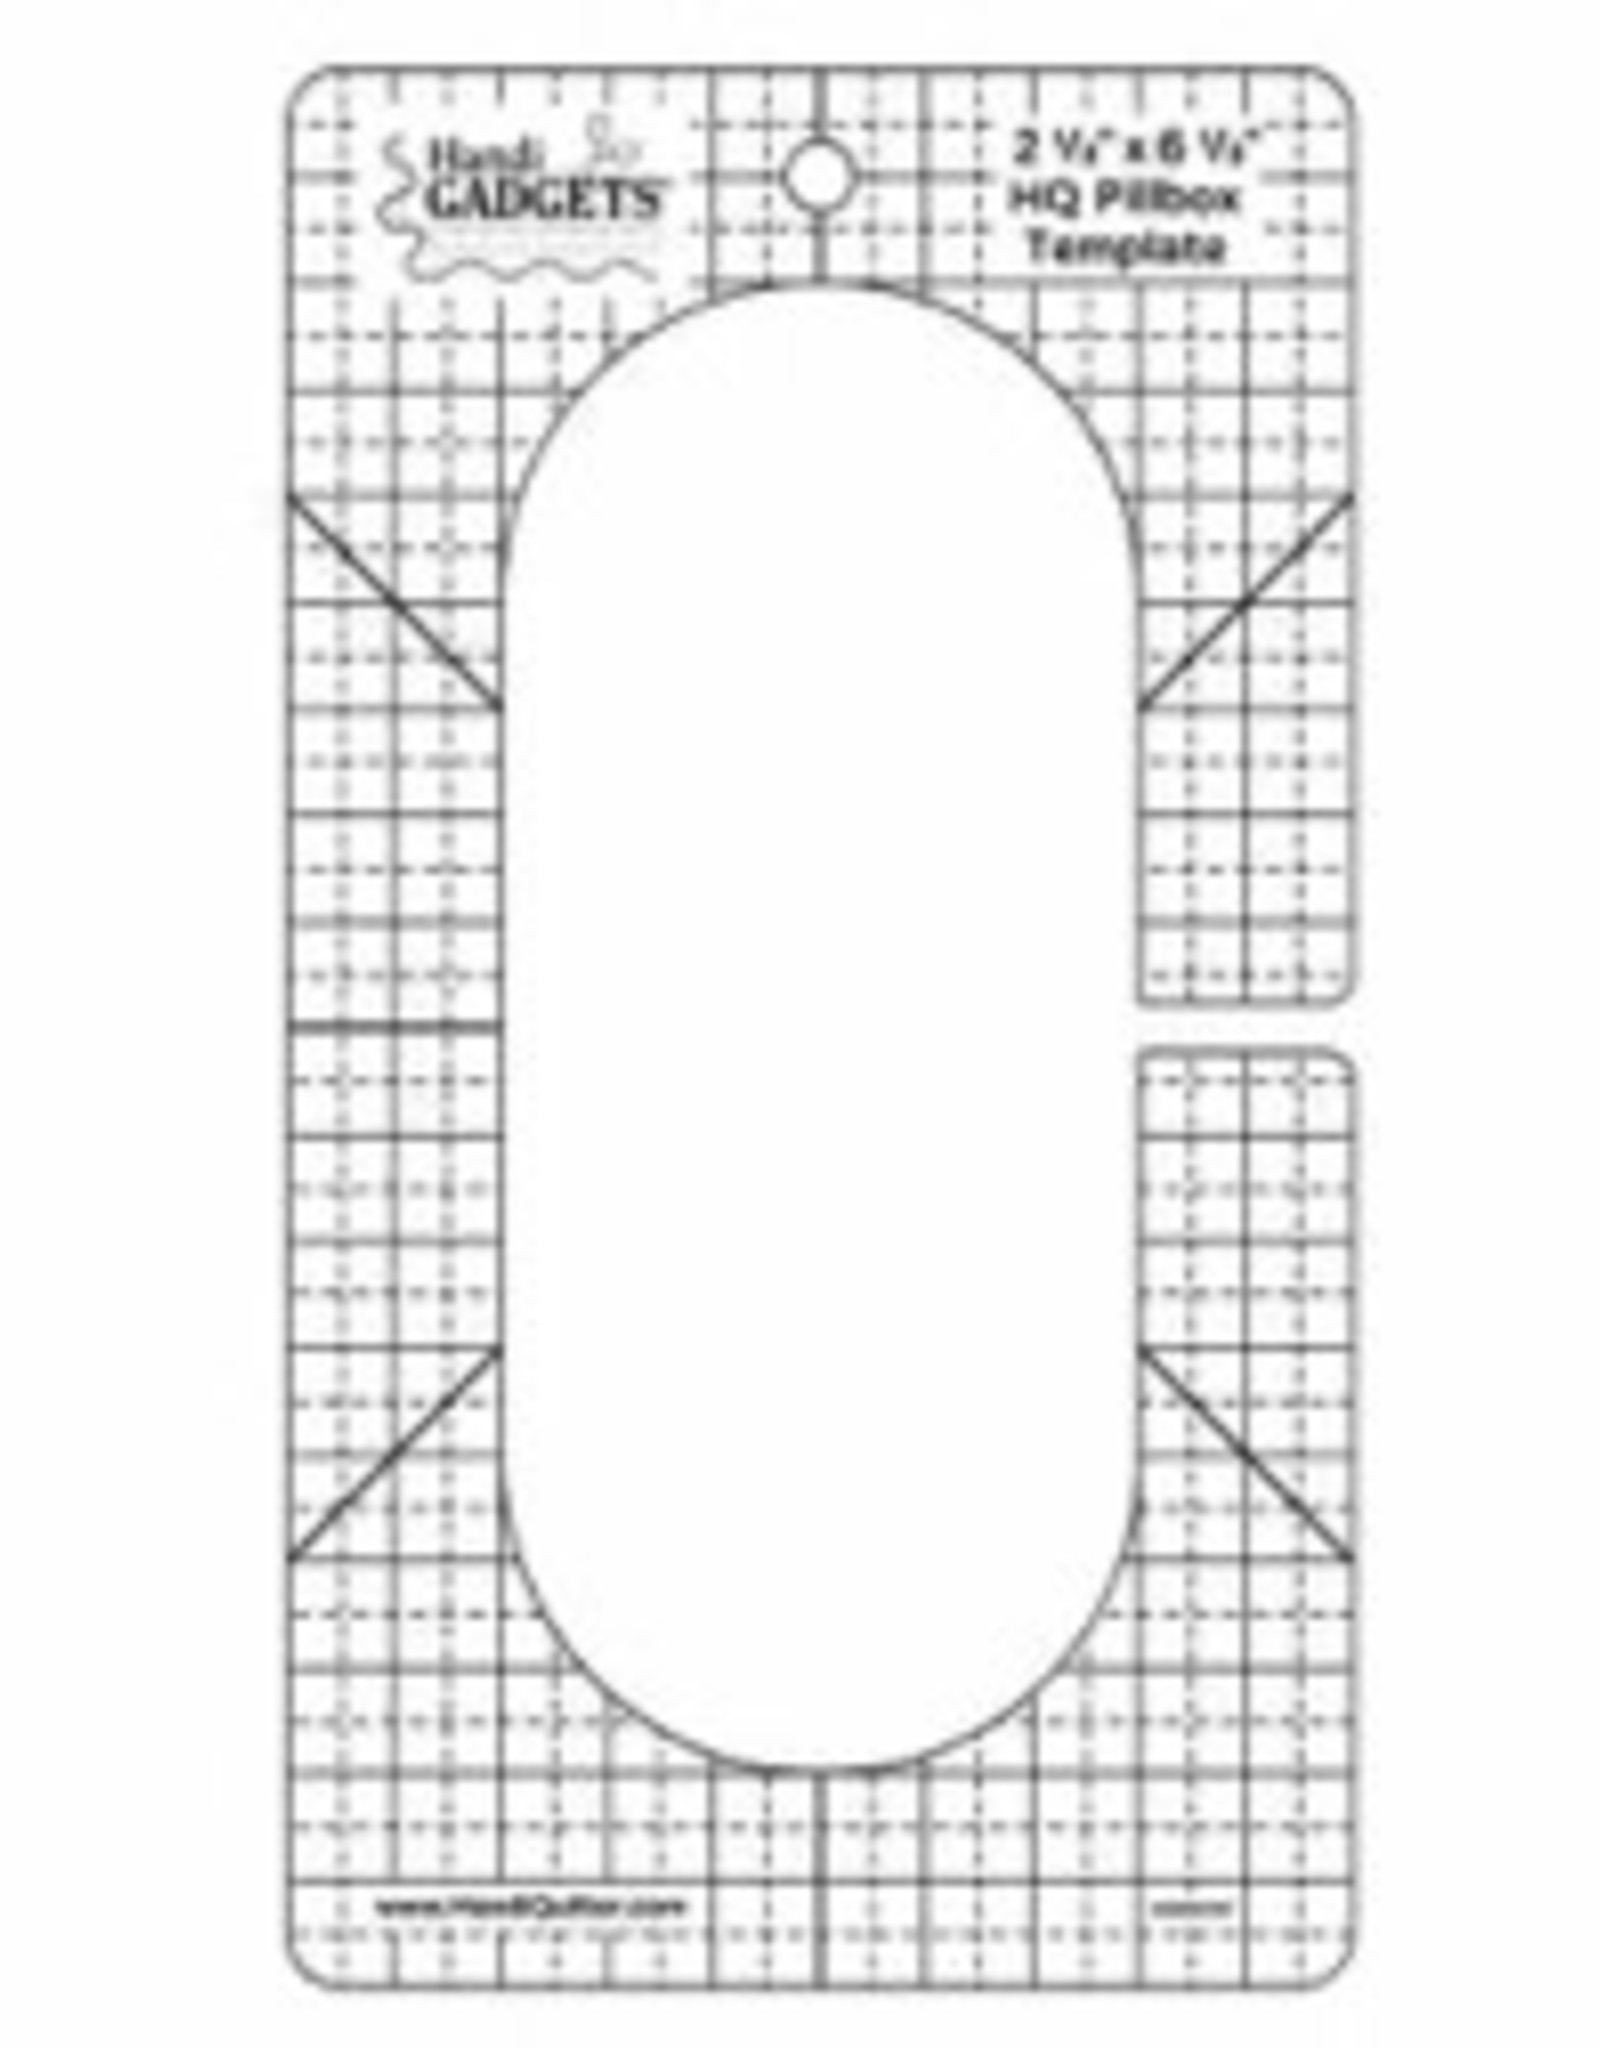 Handy Quilter HQ Pillbox Template Ruler